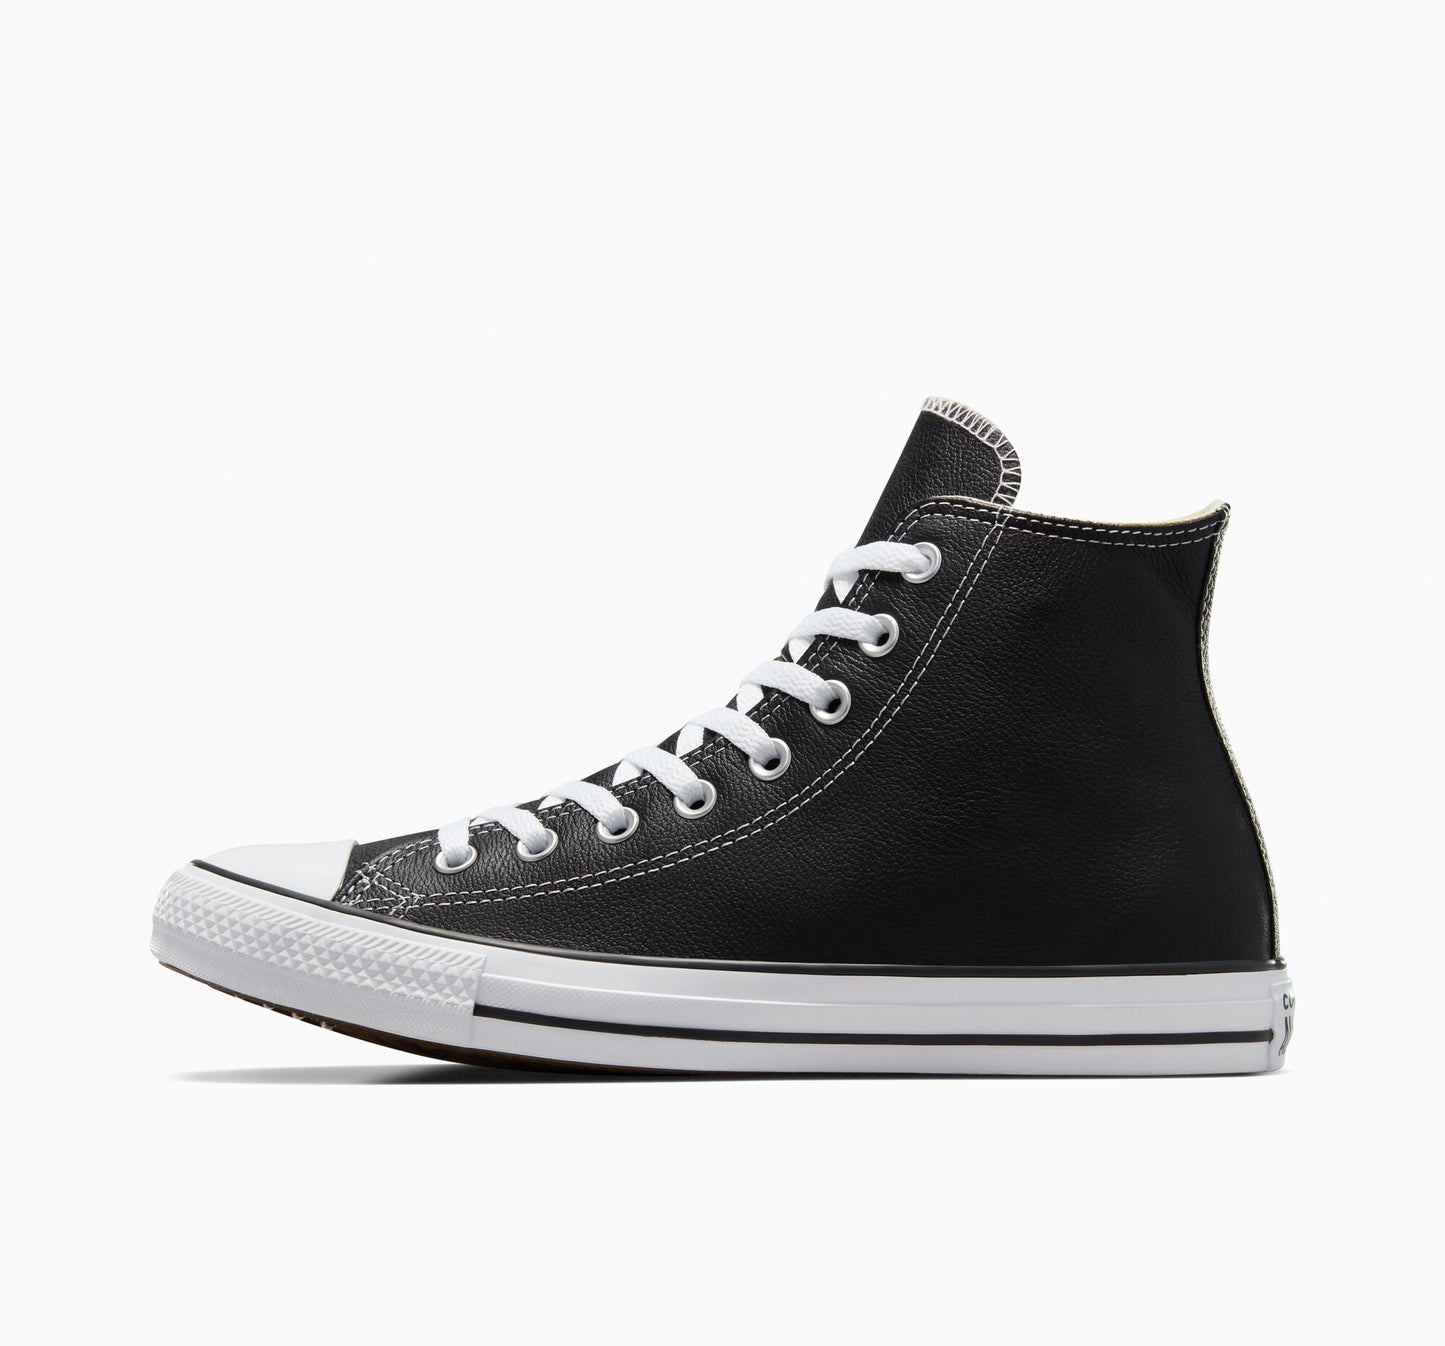 Converse All Star Leather Black/White (1:1 Batch)